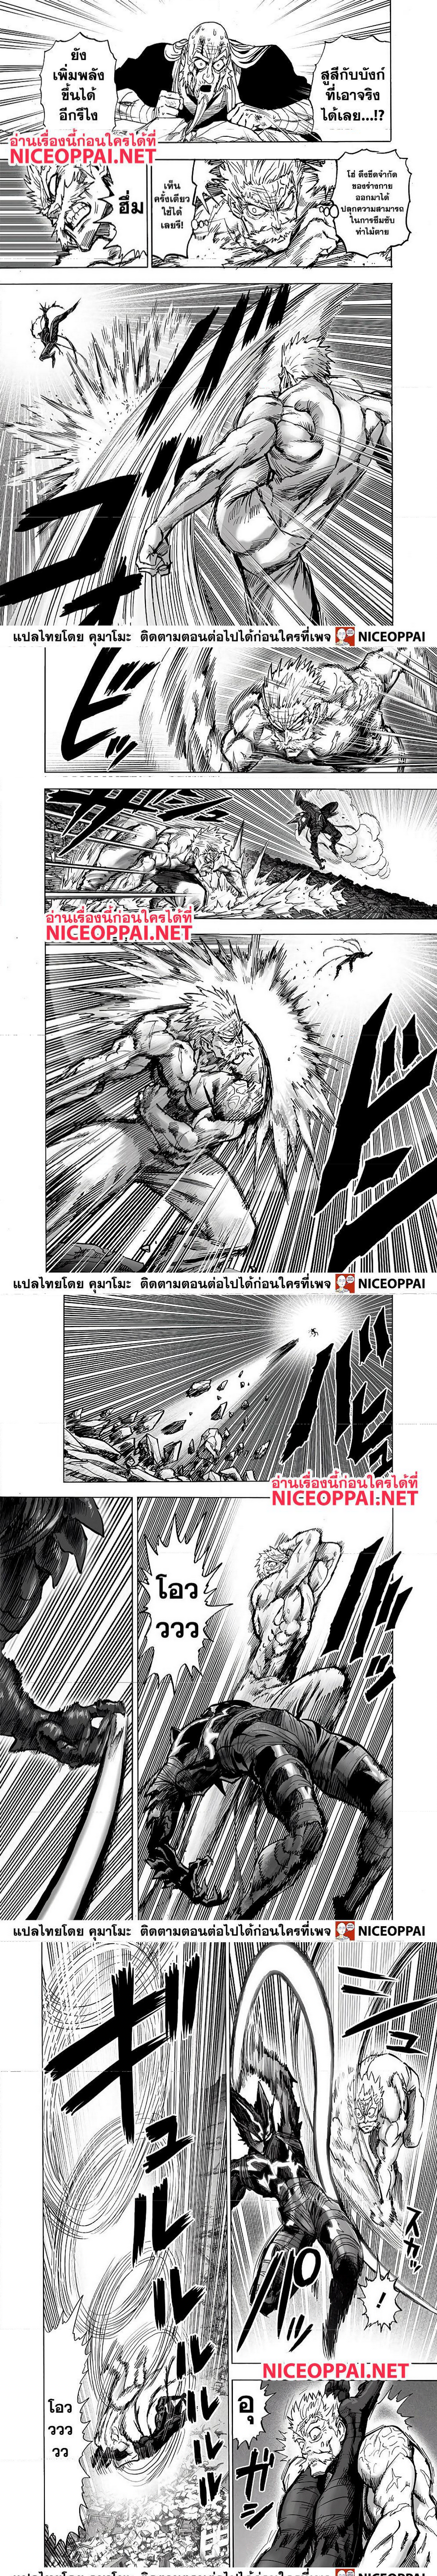 One Punch Man148 (3)